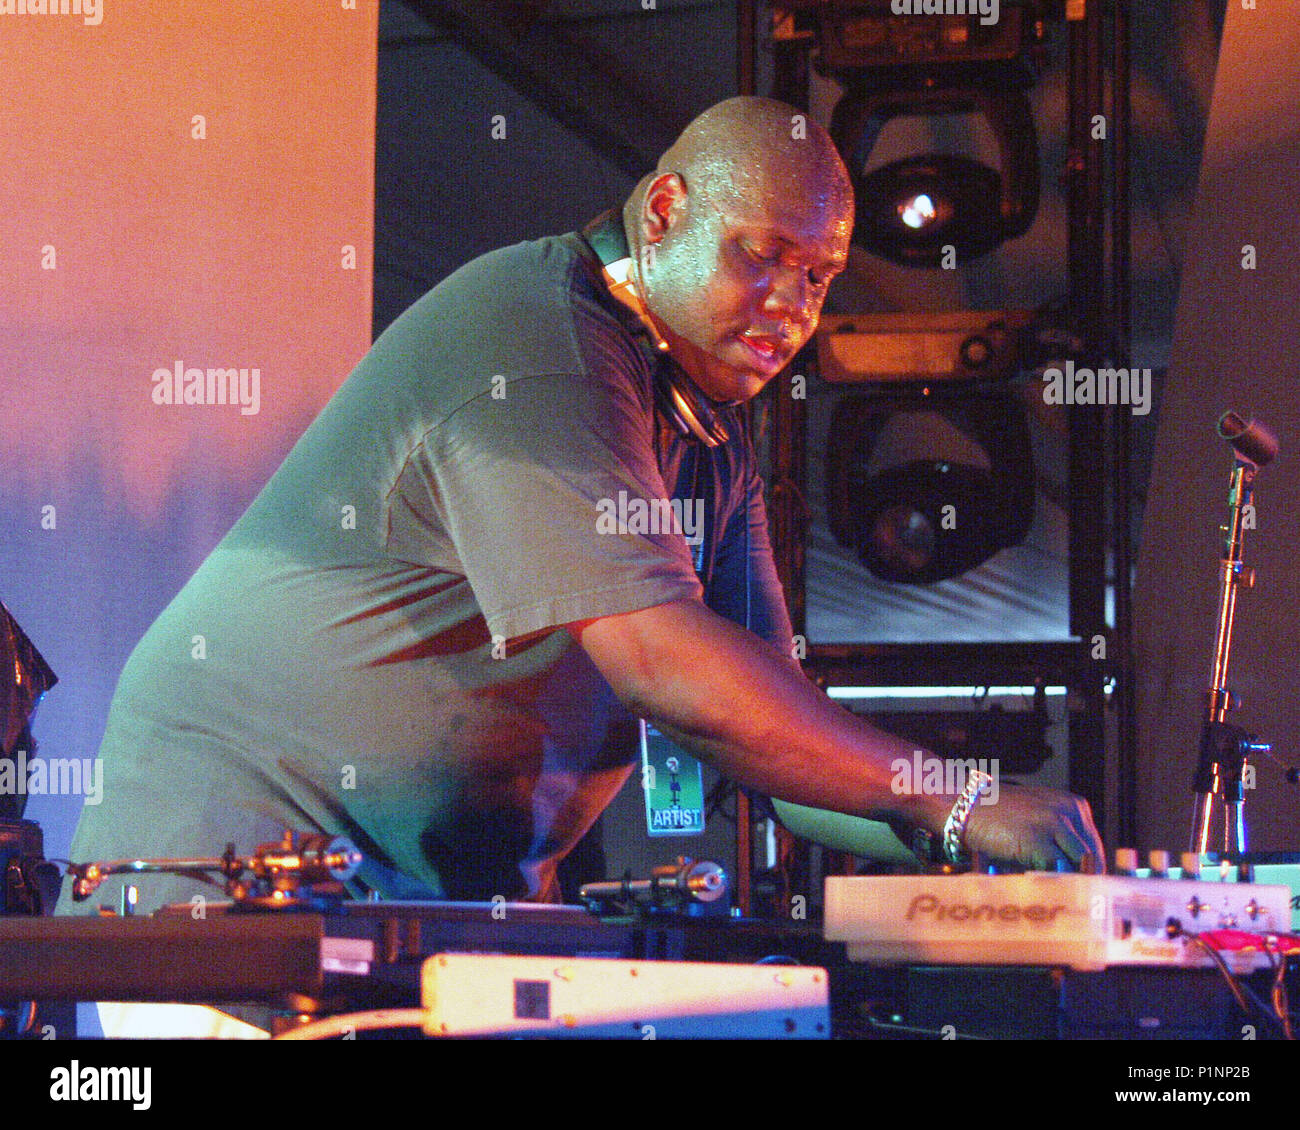 ATLANTA, GA - July 11: DJ Carl Cox performs during the very first stop of the AREA : ONE Festival at Lakewood Amphitheatre in Atlanta, Georgia on July 11, 2001. CREDIT: Chris McKay / MediaPunch Stock Photo